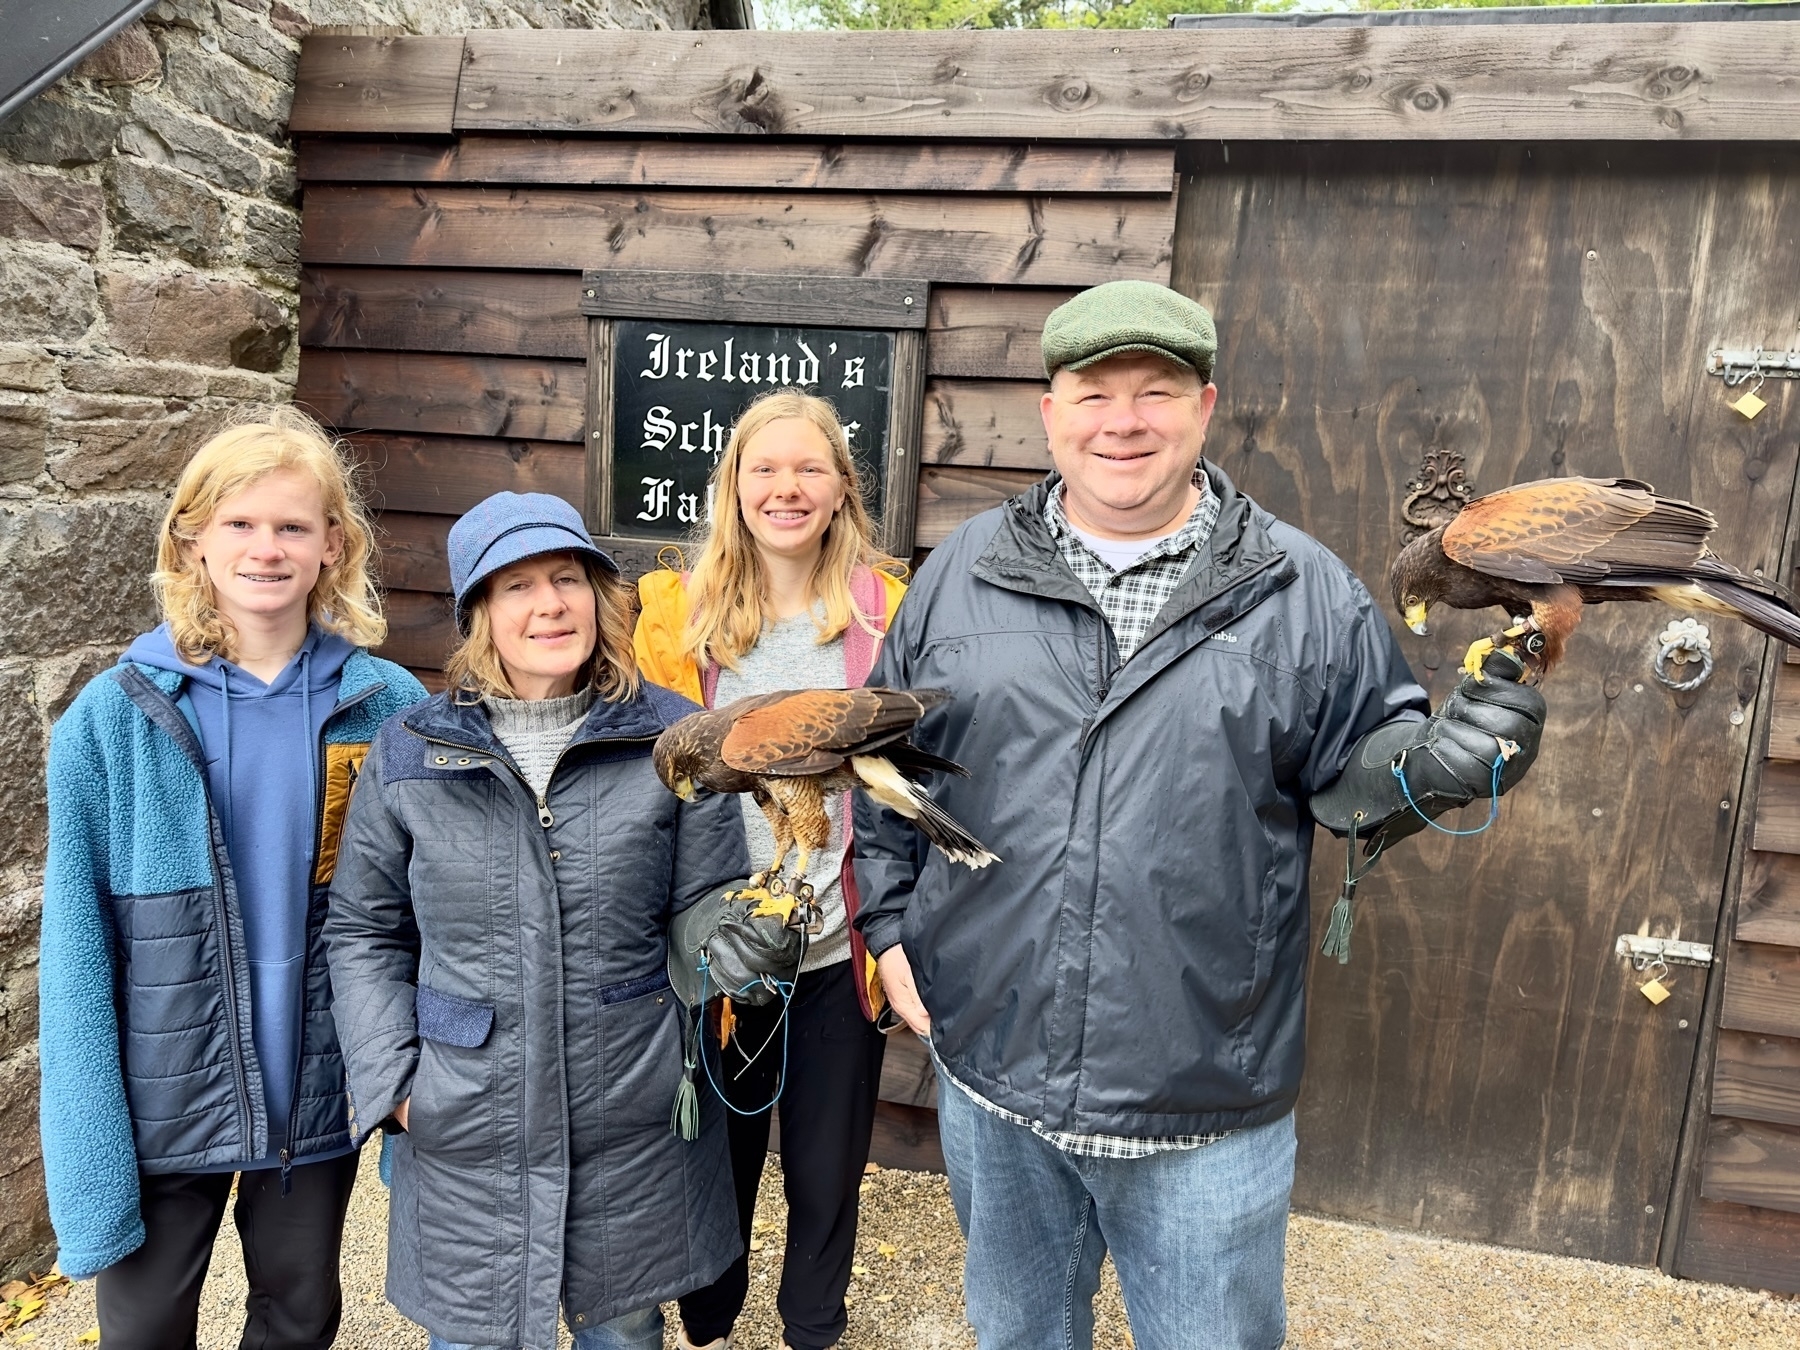 Auto-generated description: A group of four people, one child, and three adults are smiling while holding birds of prey at Ireland's School of Falconry.